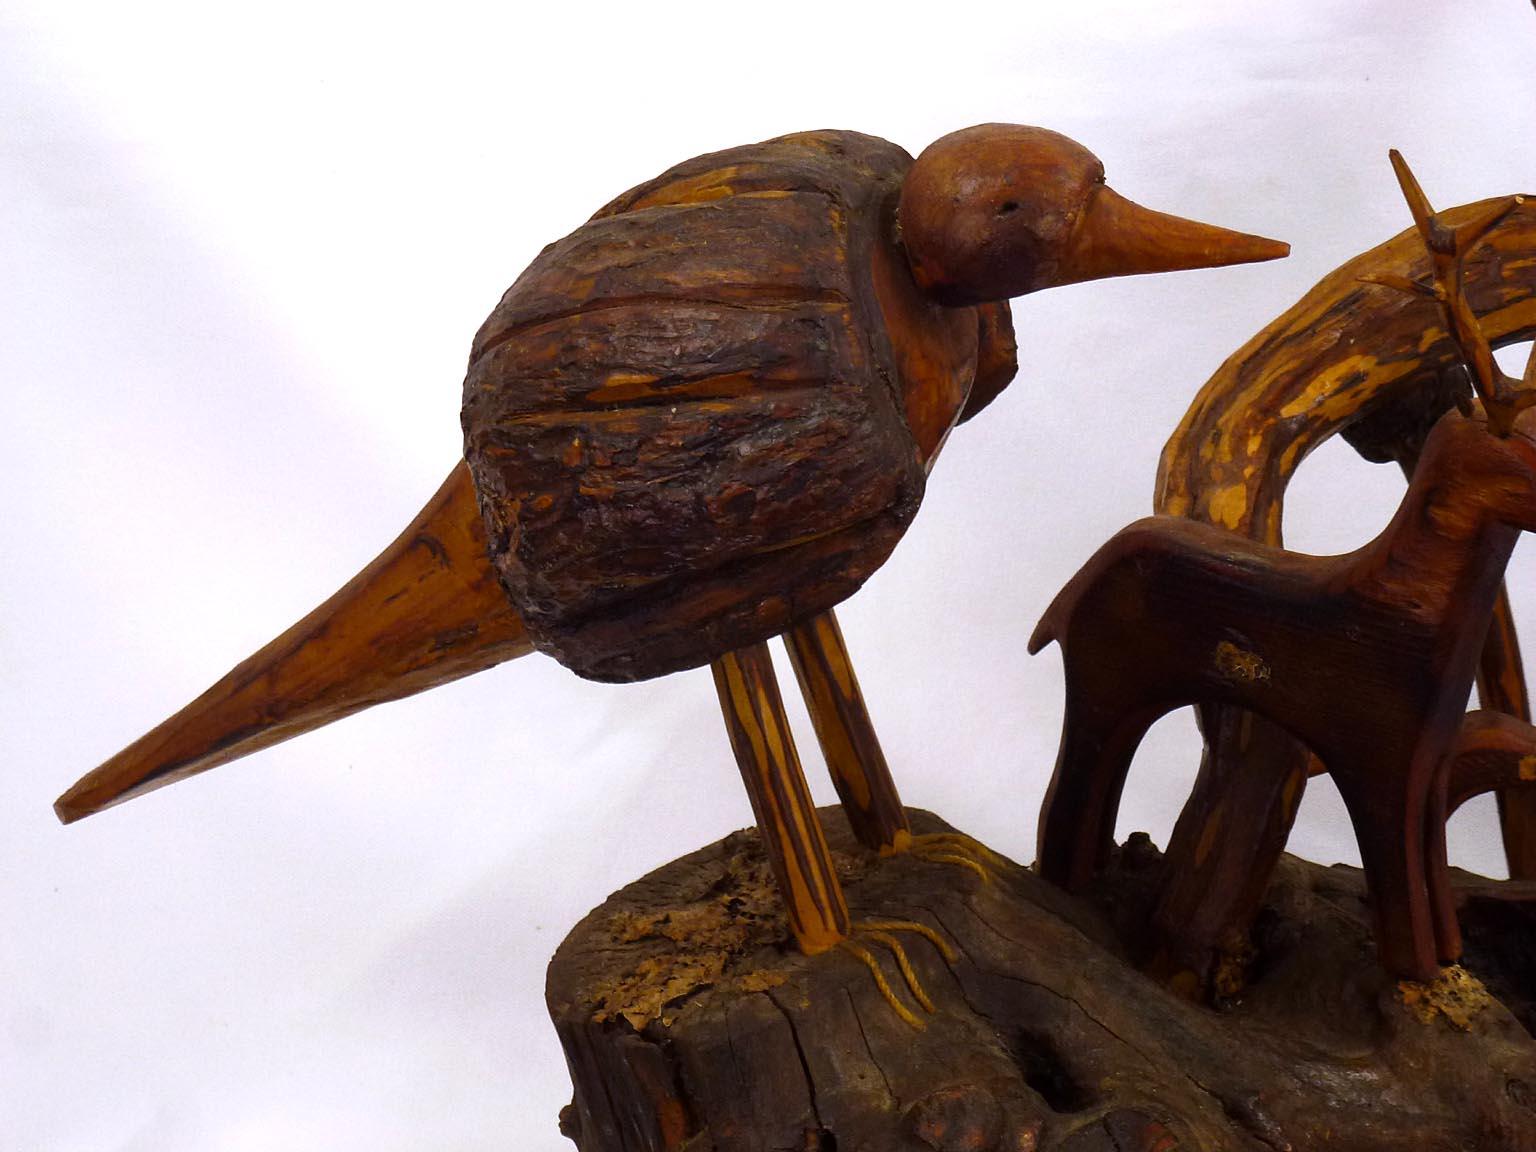 Assemblage of Carved Birds and Animals by the Outsider Artist Russell Gillespie 3